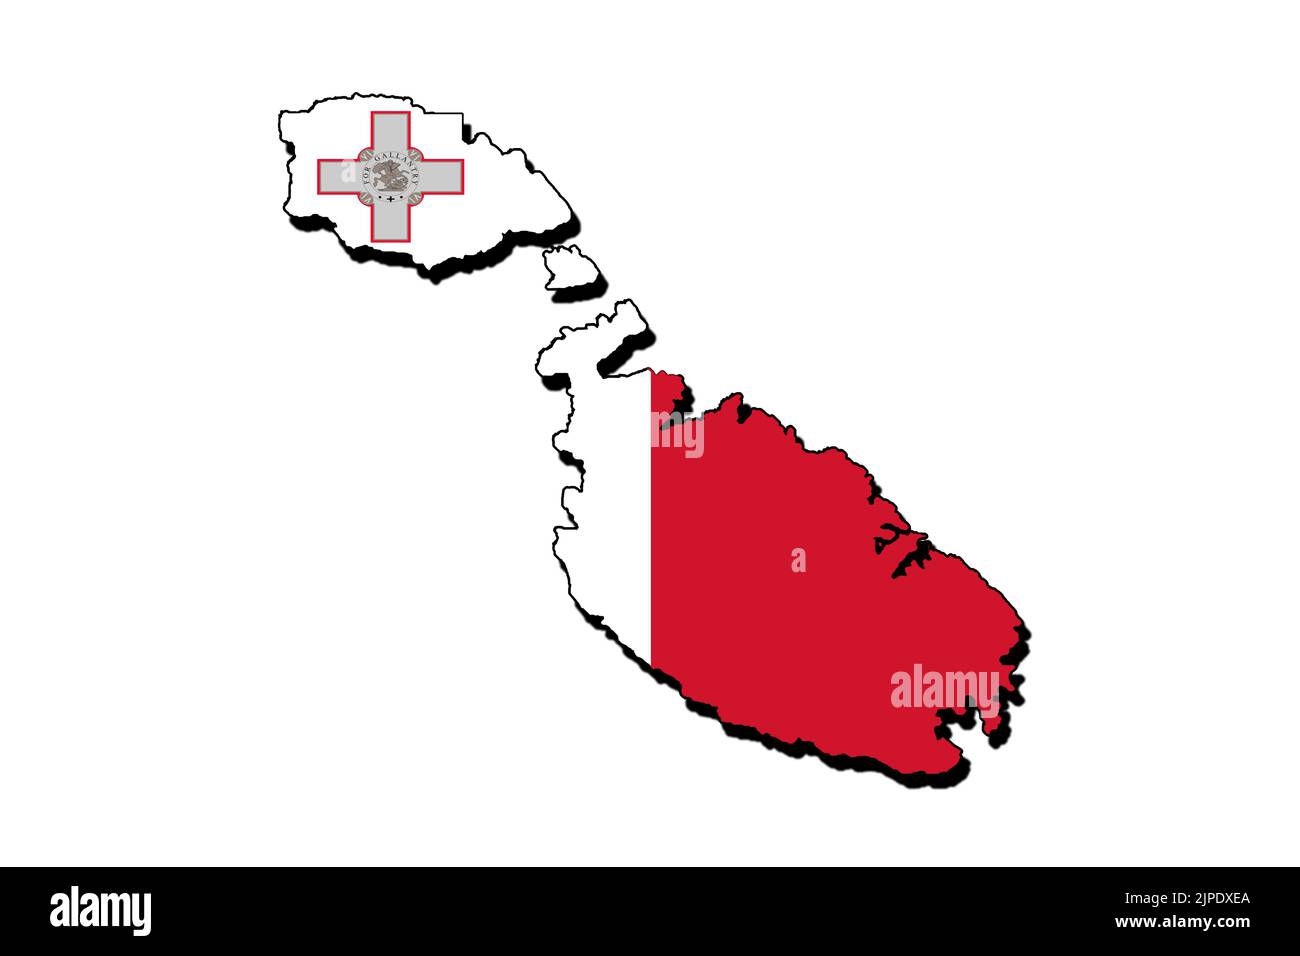 Silhouette of the map of malta with its flag Stock Photo